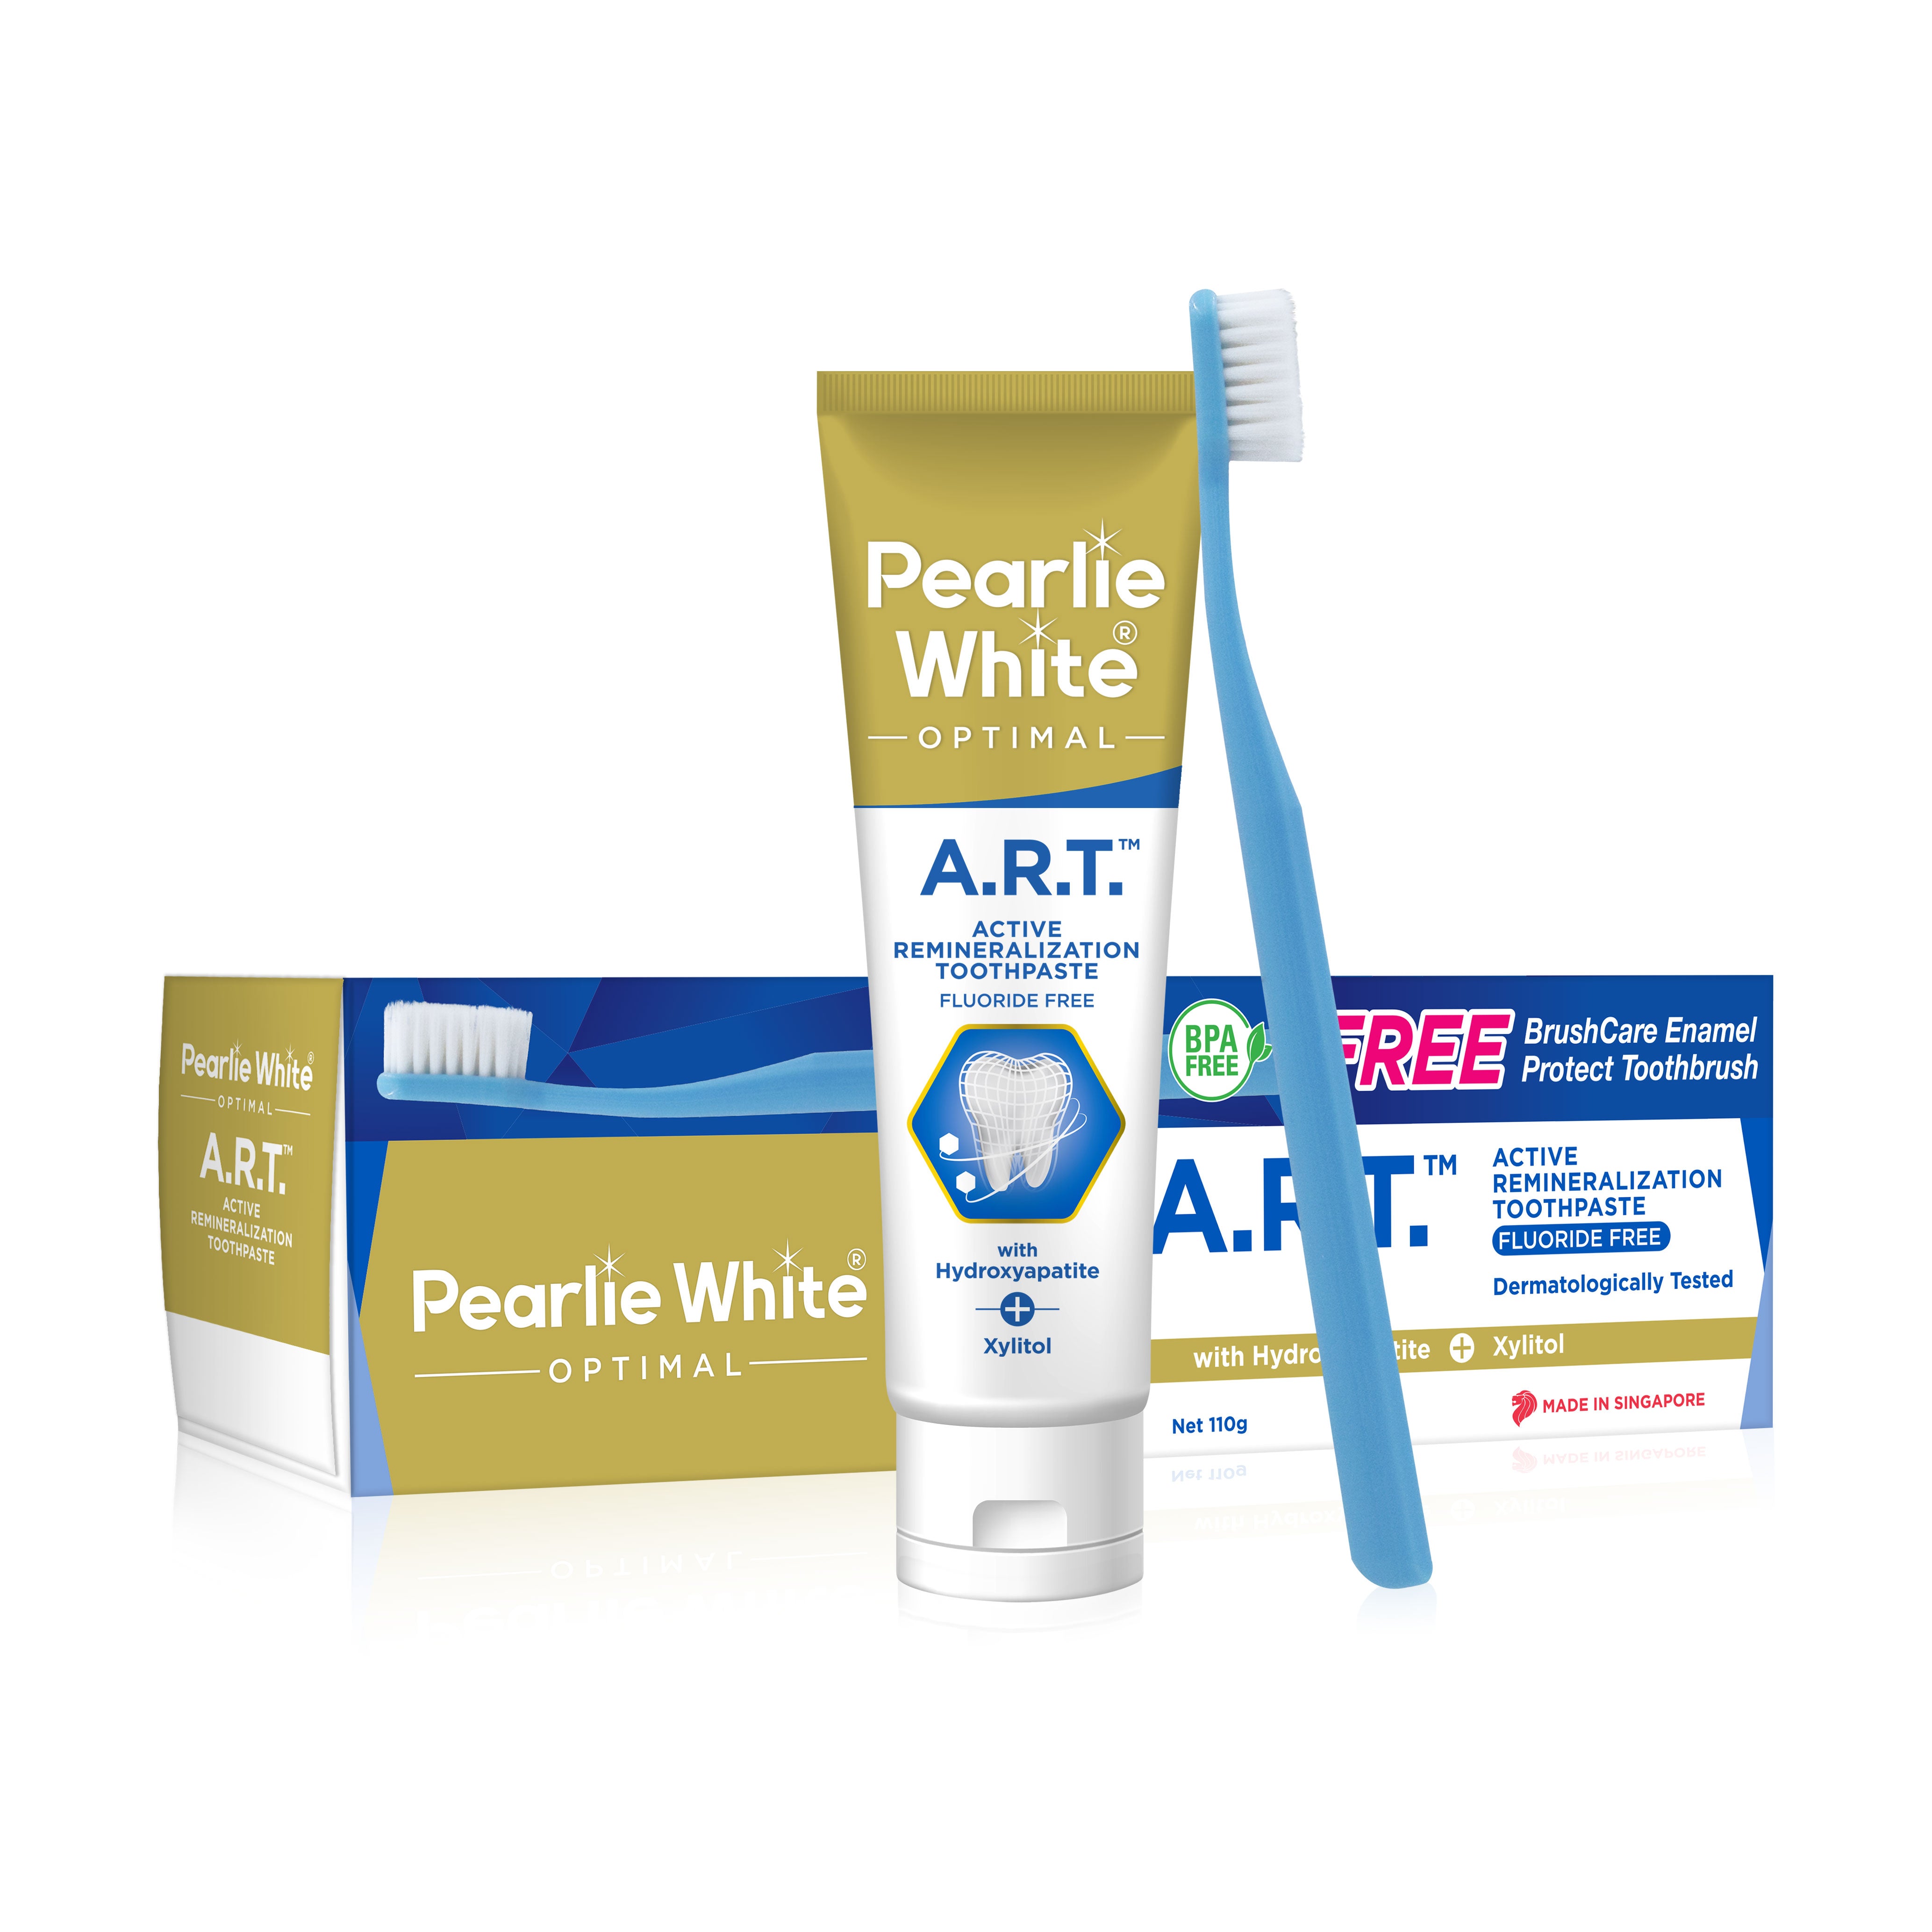 Optimal A.R.T. Active Remineralization Toothpaste 110g Bundle